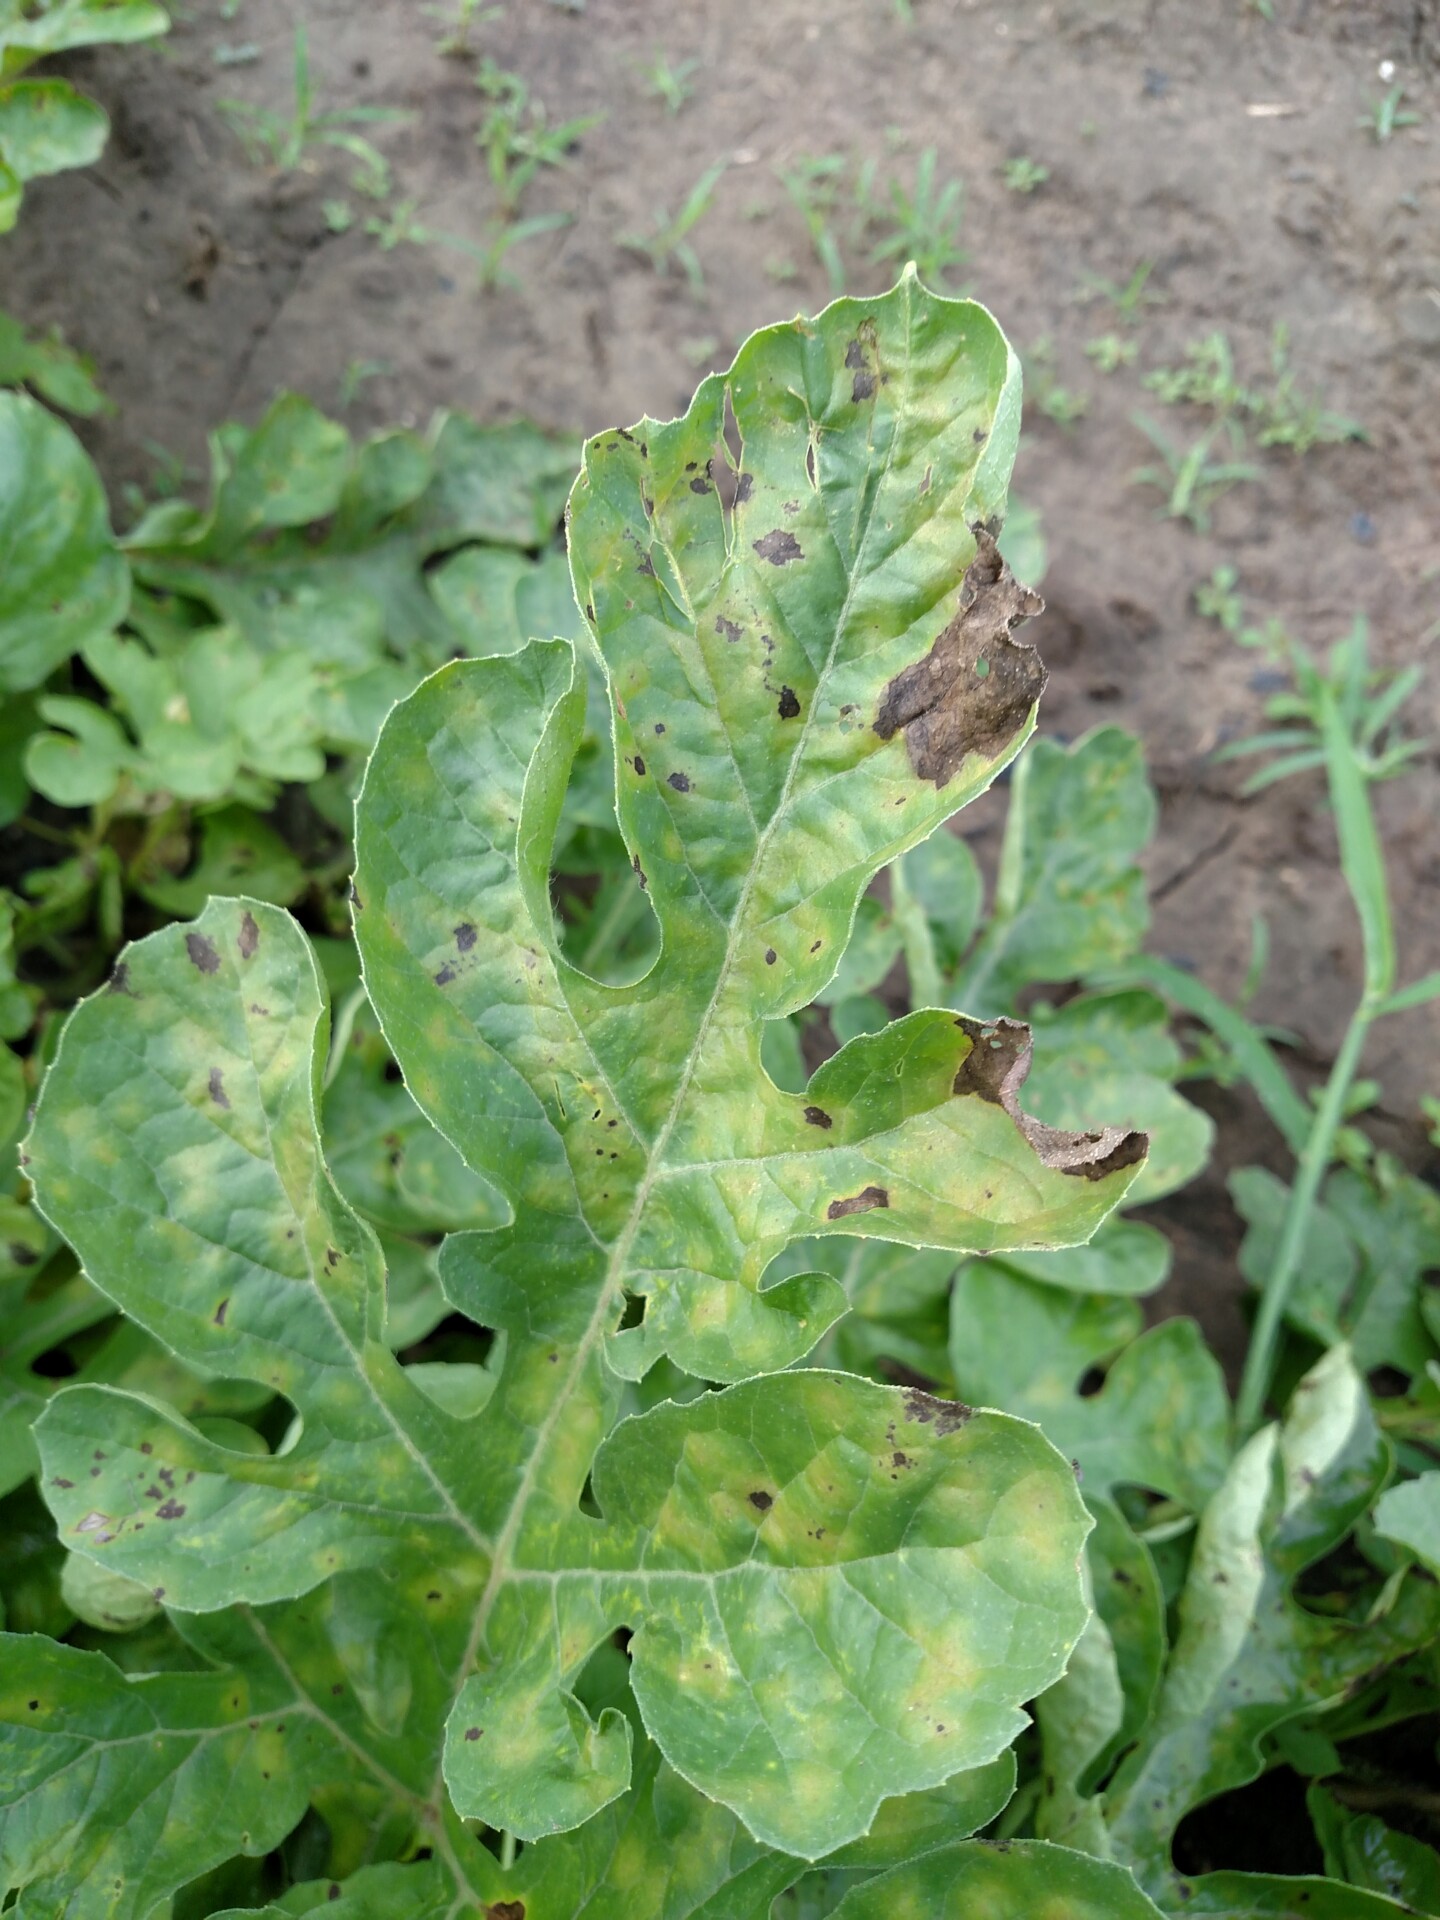 Figure 2. Chlorotic and necrotic lesions on watermelon leaf.